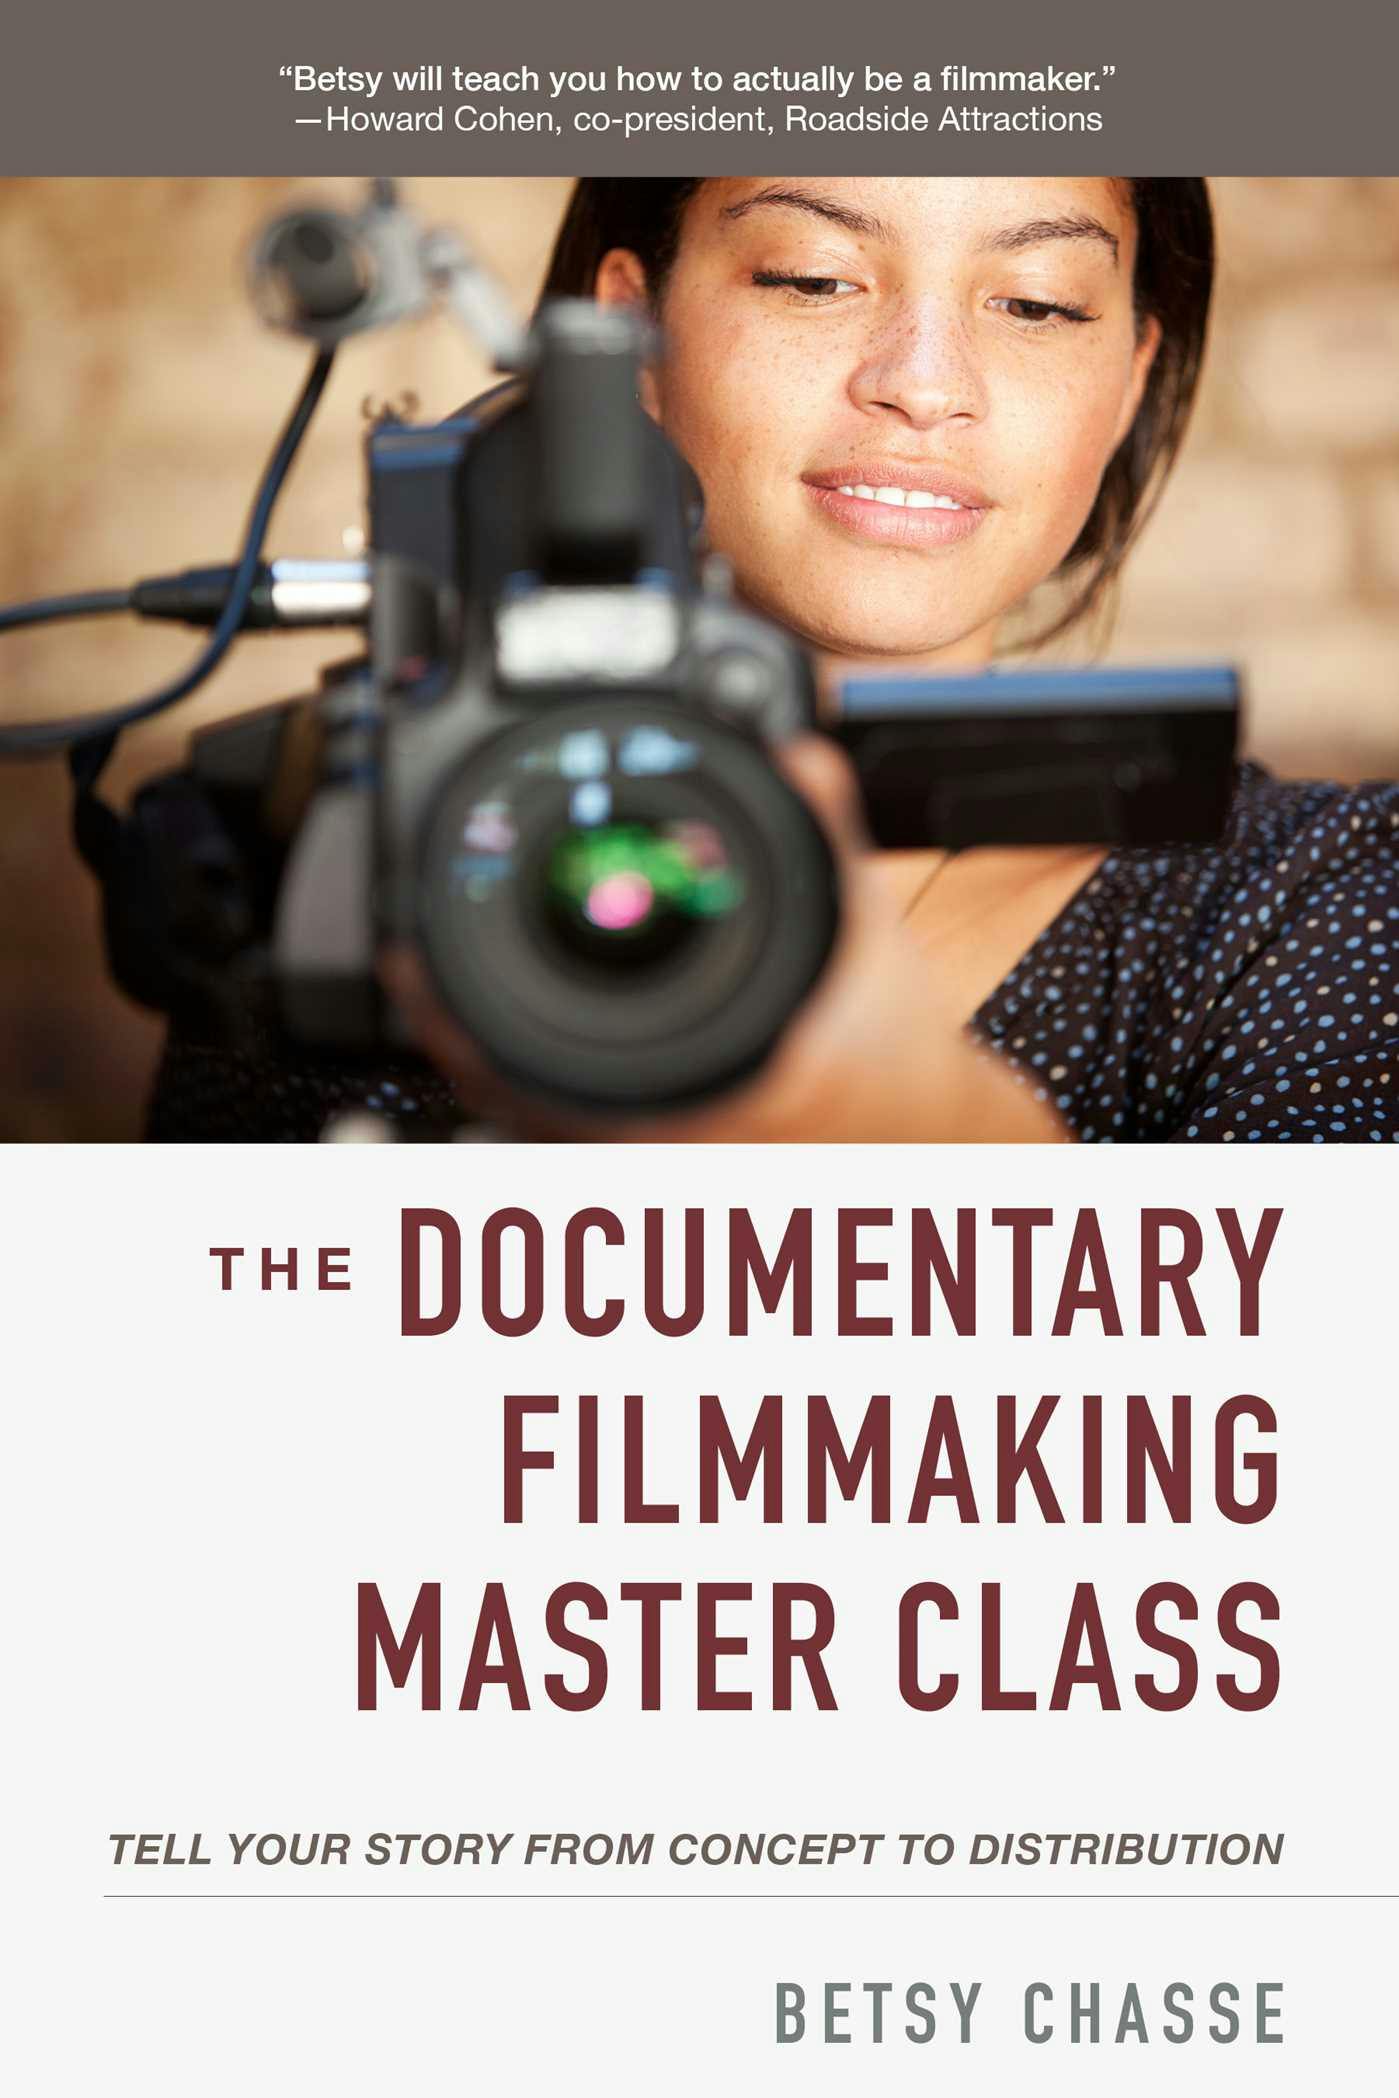 The Documentary Filmmaking Master Class: Tell Your Story from Concept to Distribution - Betsy Chasse